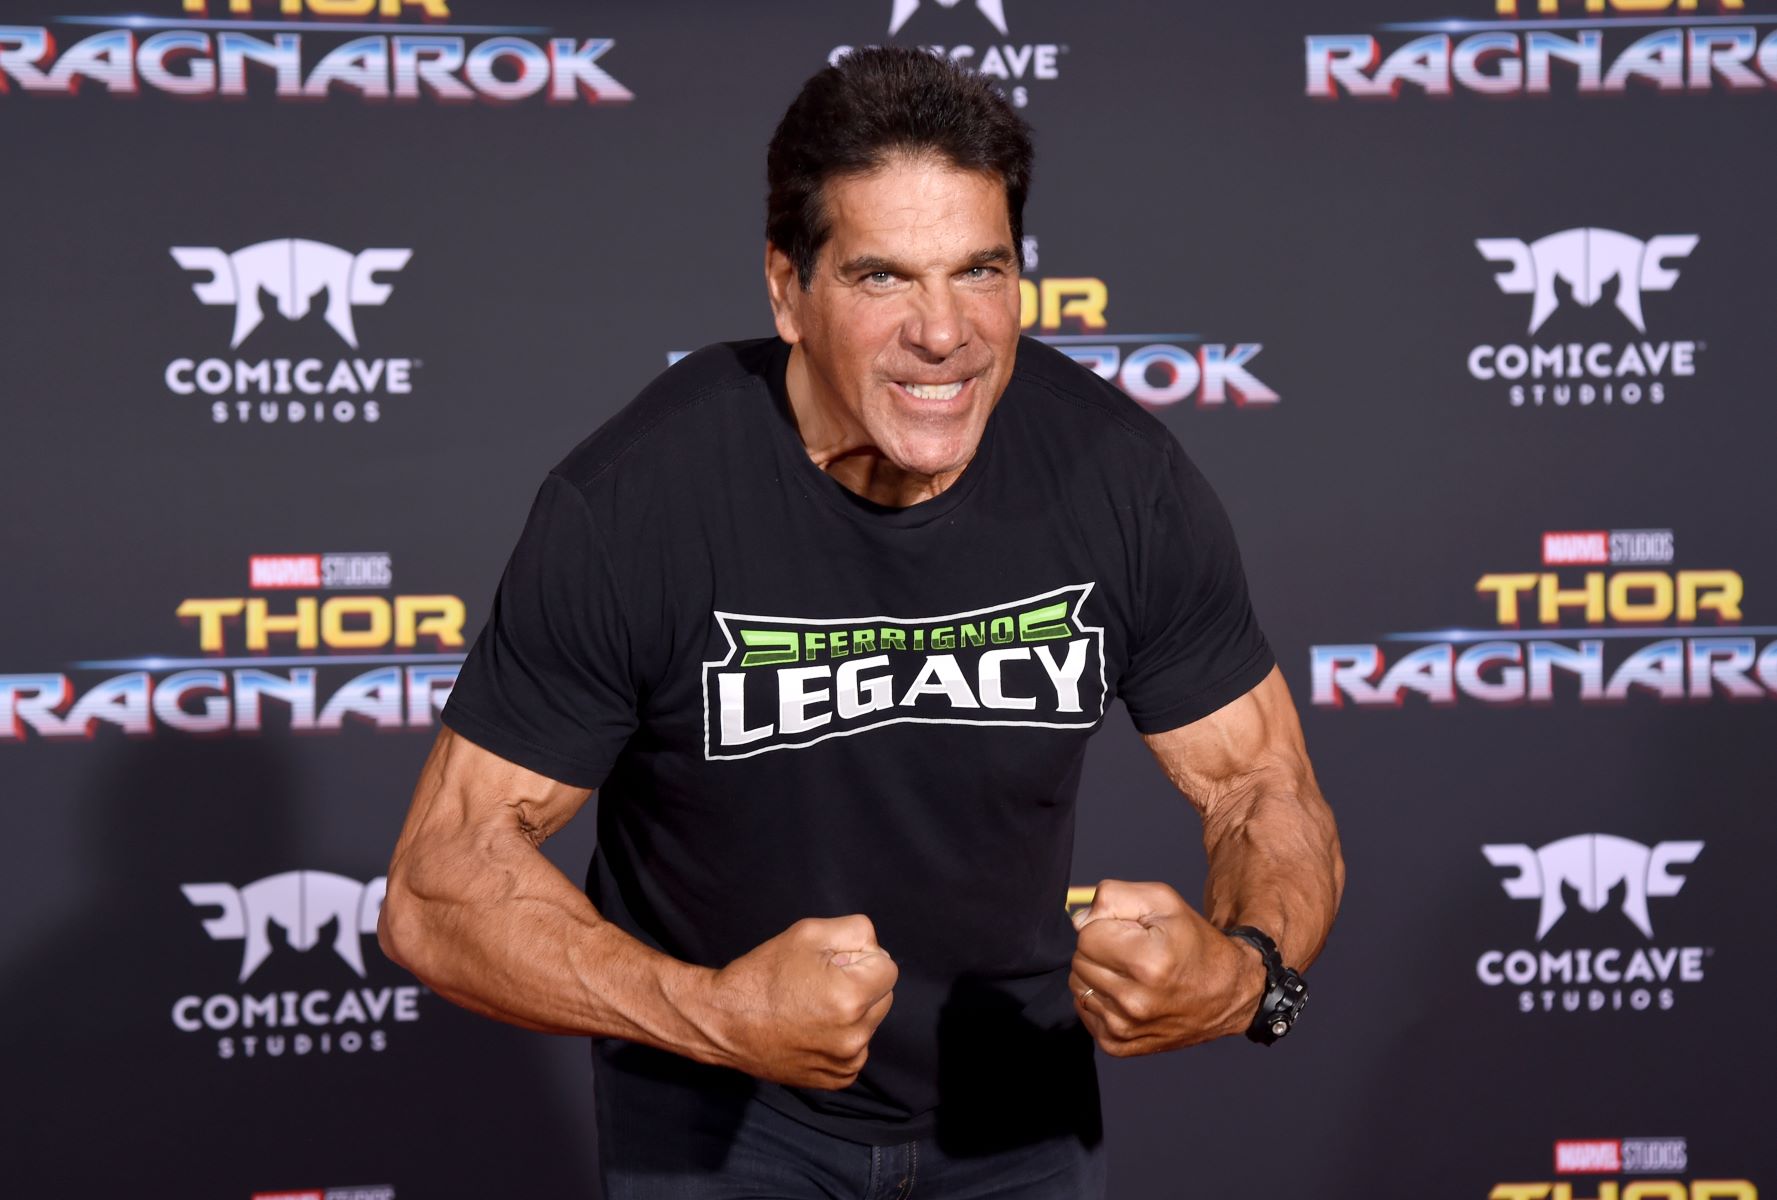 Lou Ferrigno: Net Worth 2023, bodybuilding, movies, and more